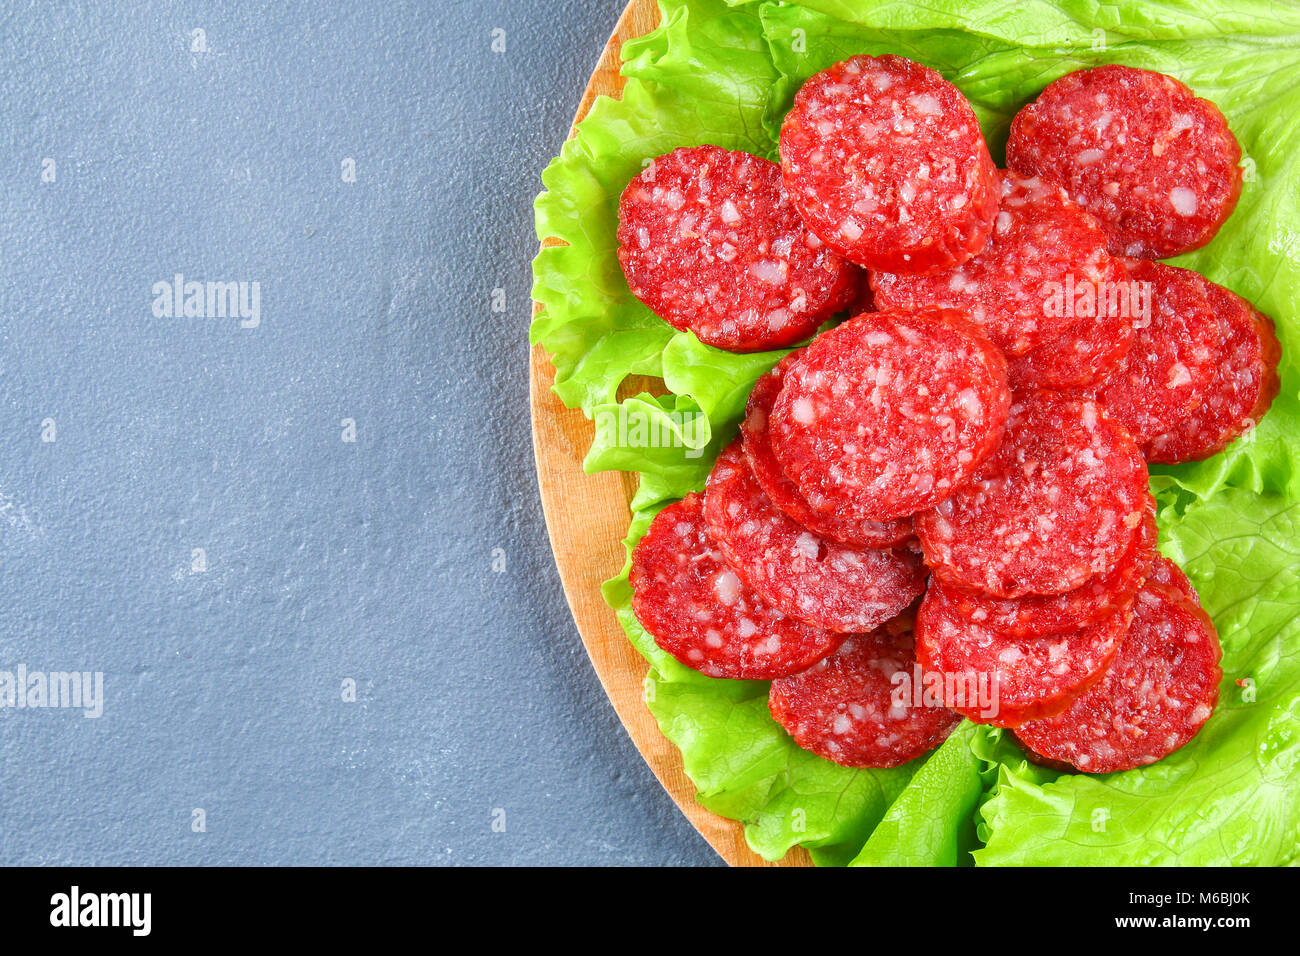 Smoked sausage, salami chopped in slices on a salad on a wooden circular cutting board on a concrete gray table Stock Photo